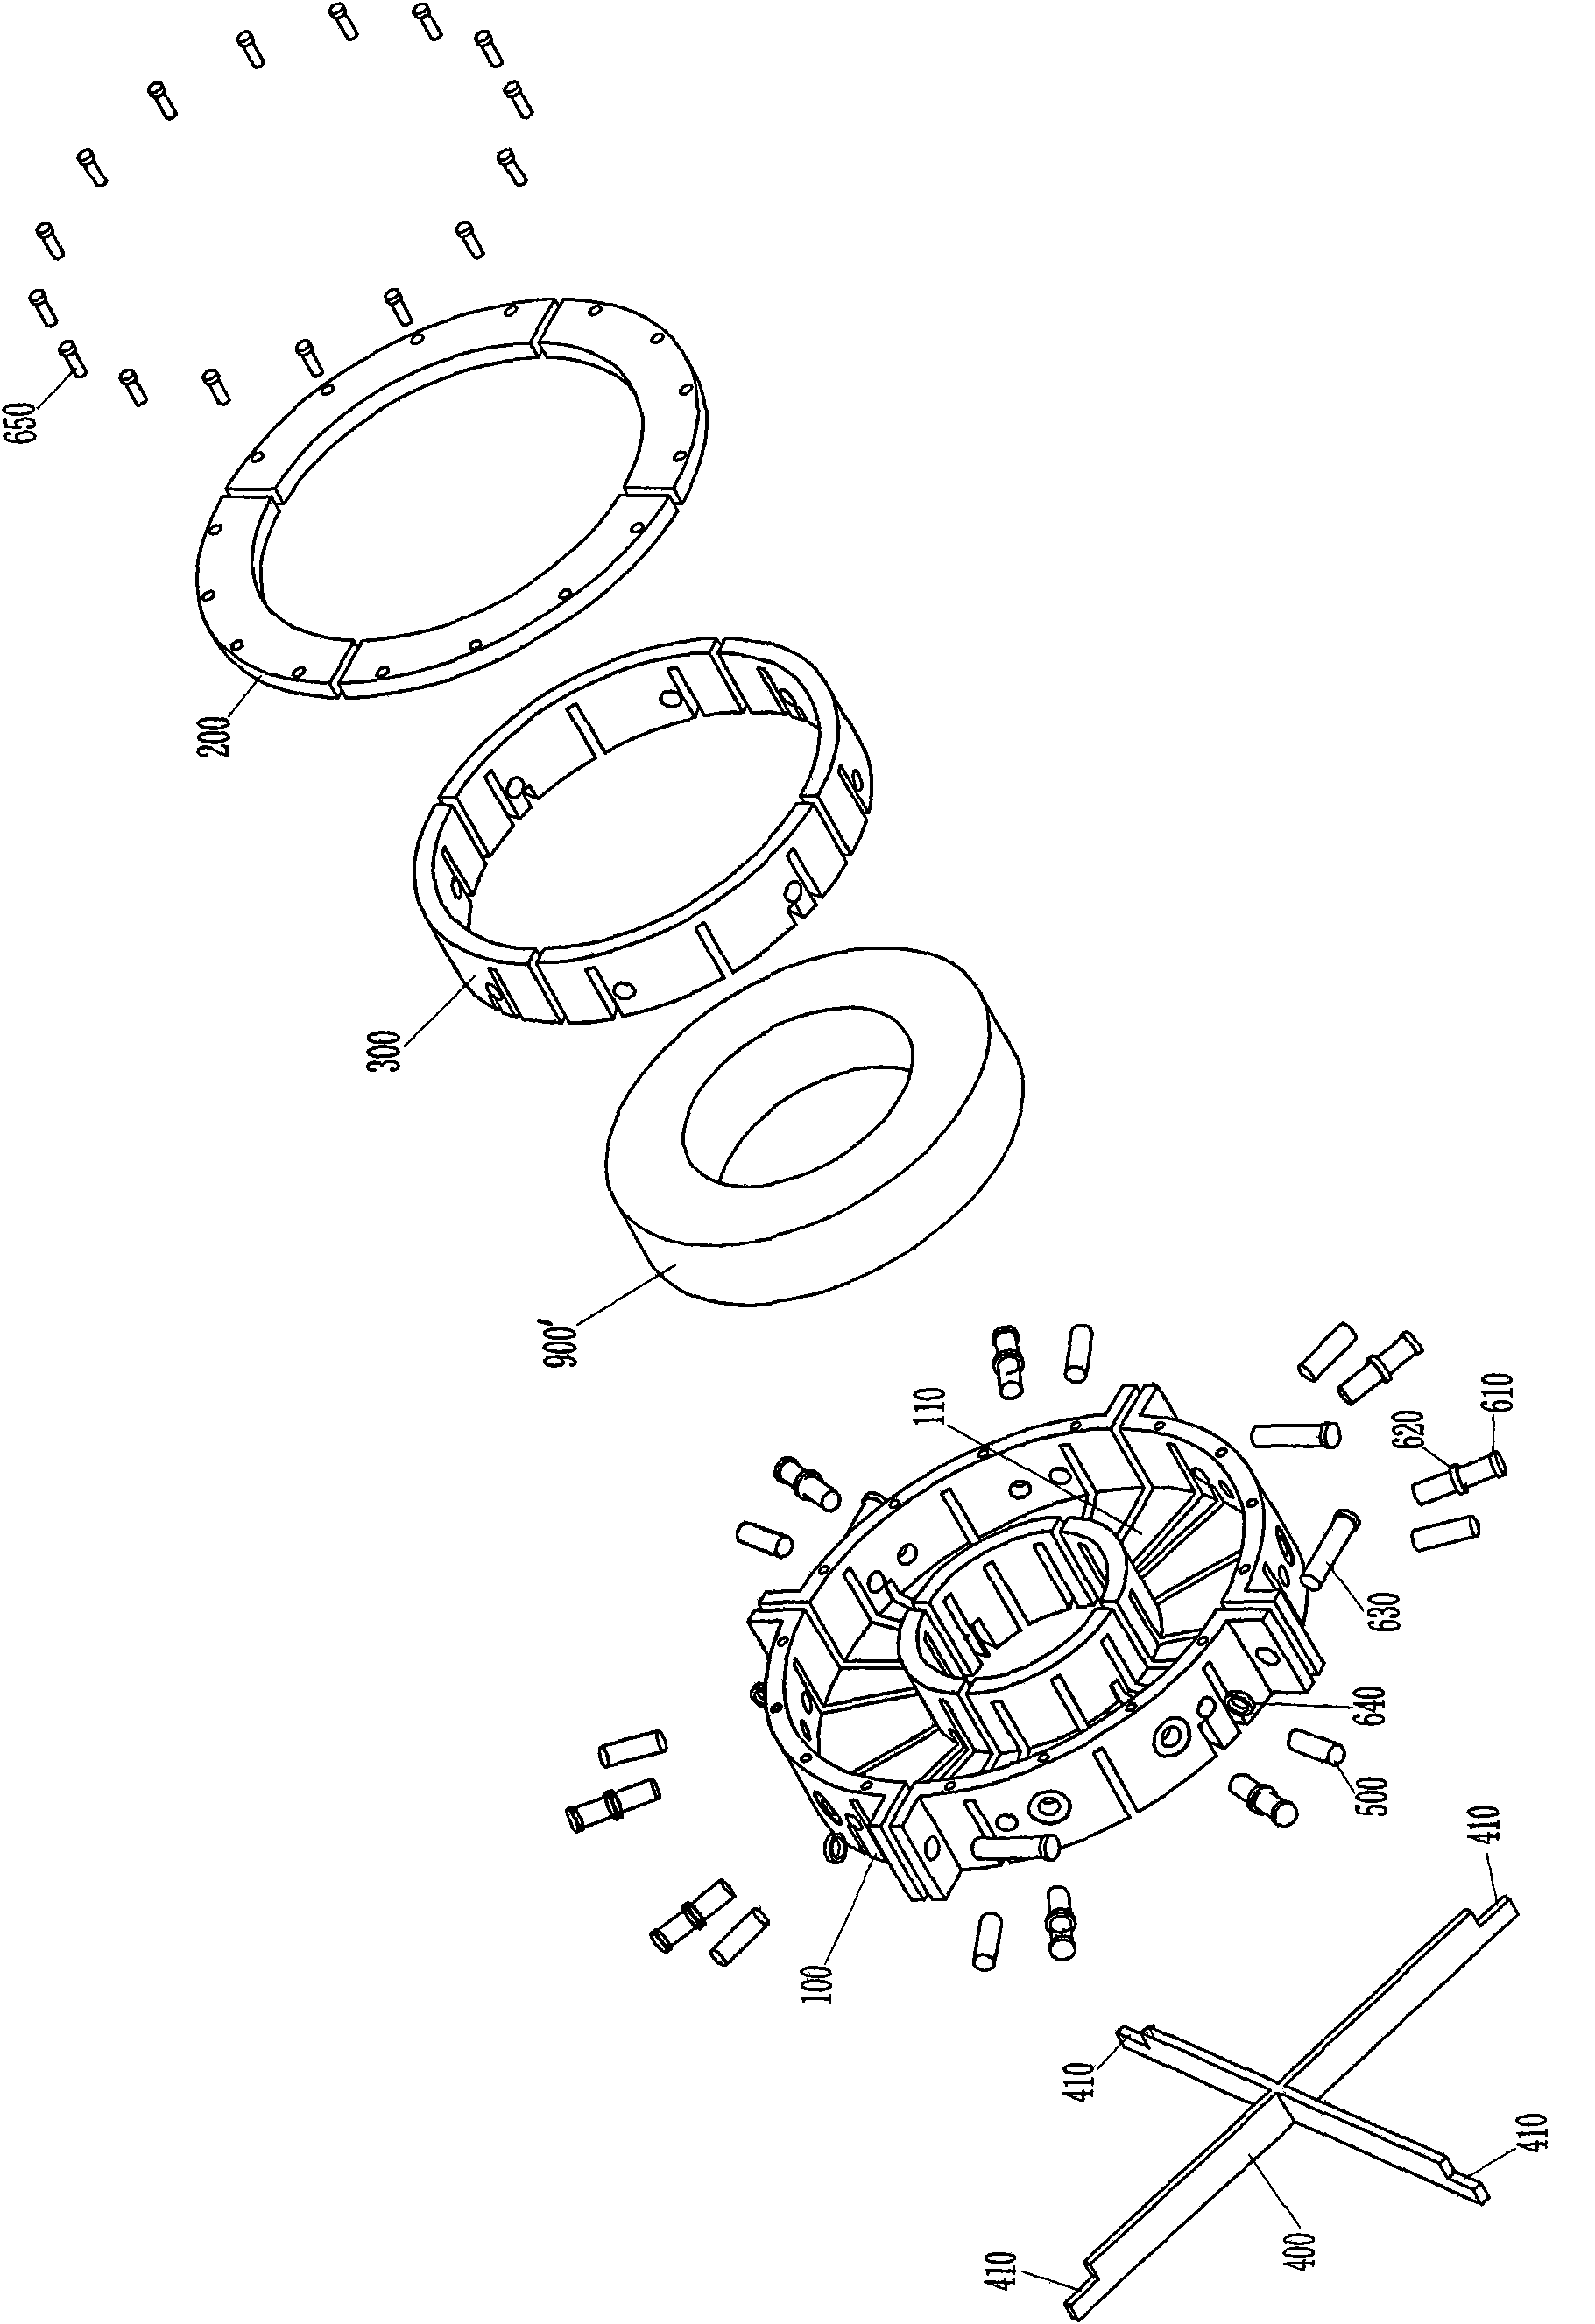 Processing method of amorphous alloy stator core slot and locking and positioning clamp thereof